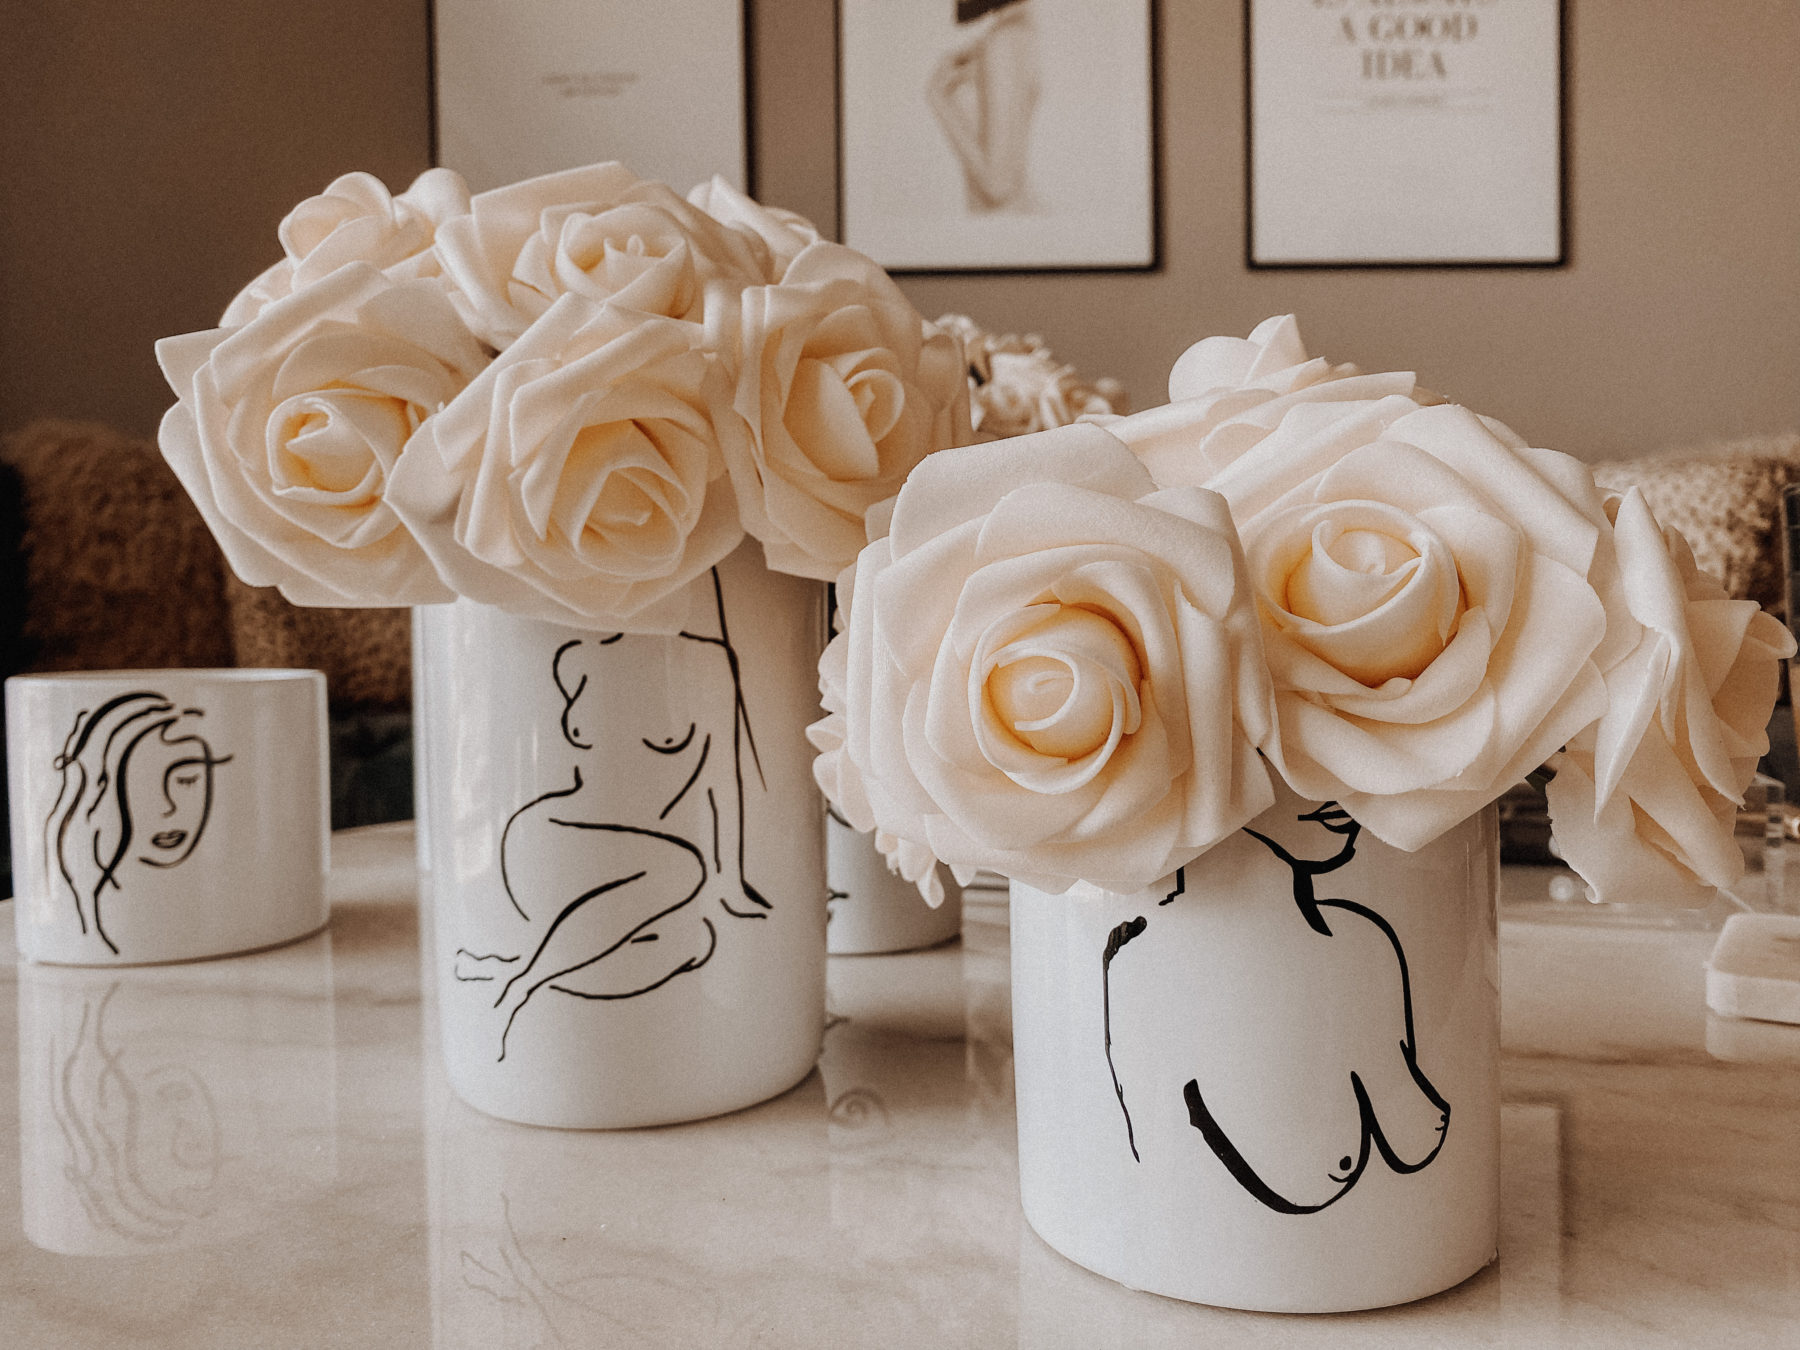 Abstract Vases w/ Faux Flowers from Amazon | Home Decor | Living Room Decor | Blondie in the City by Hayley Larue